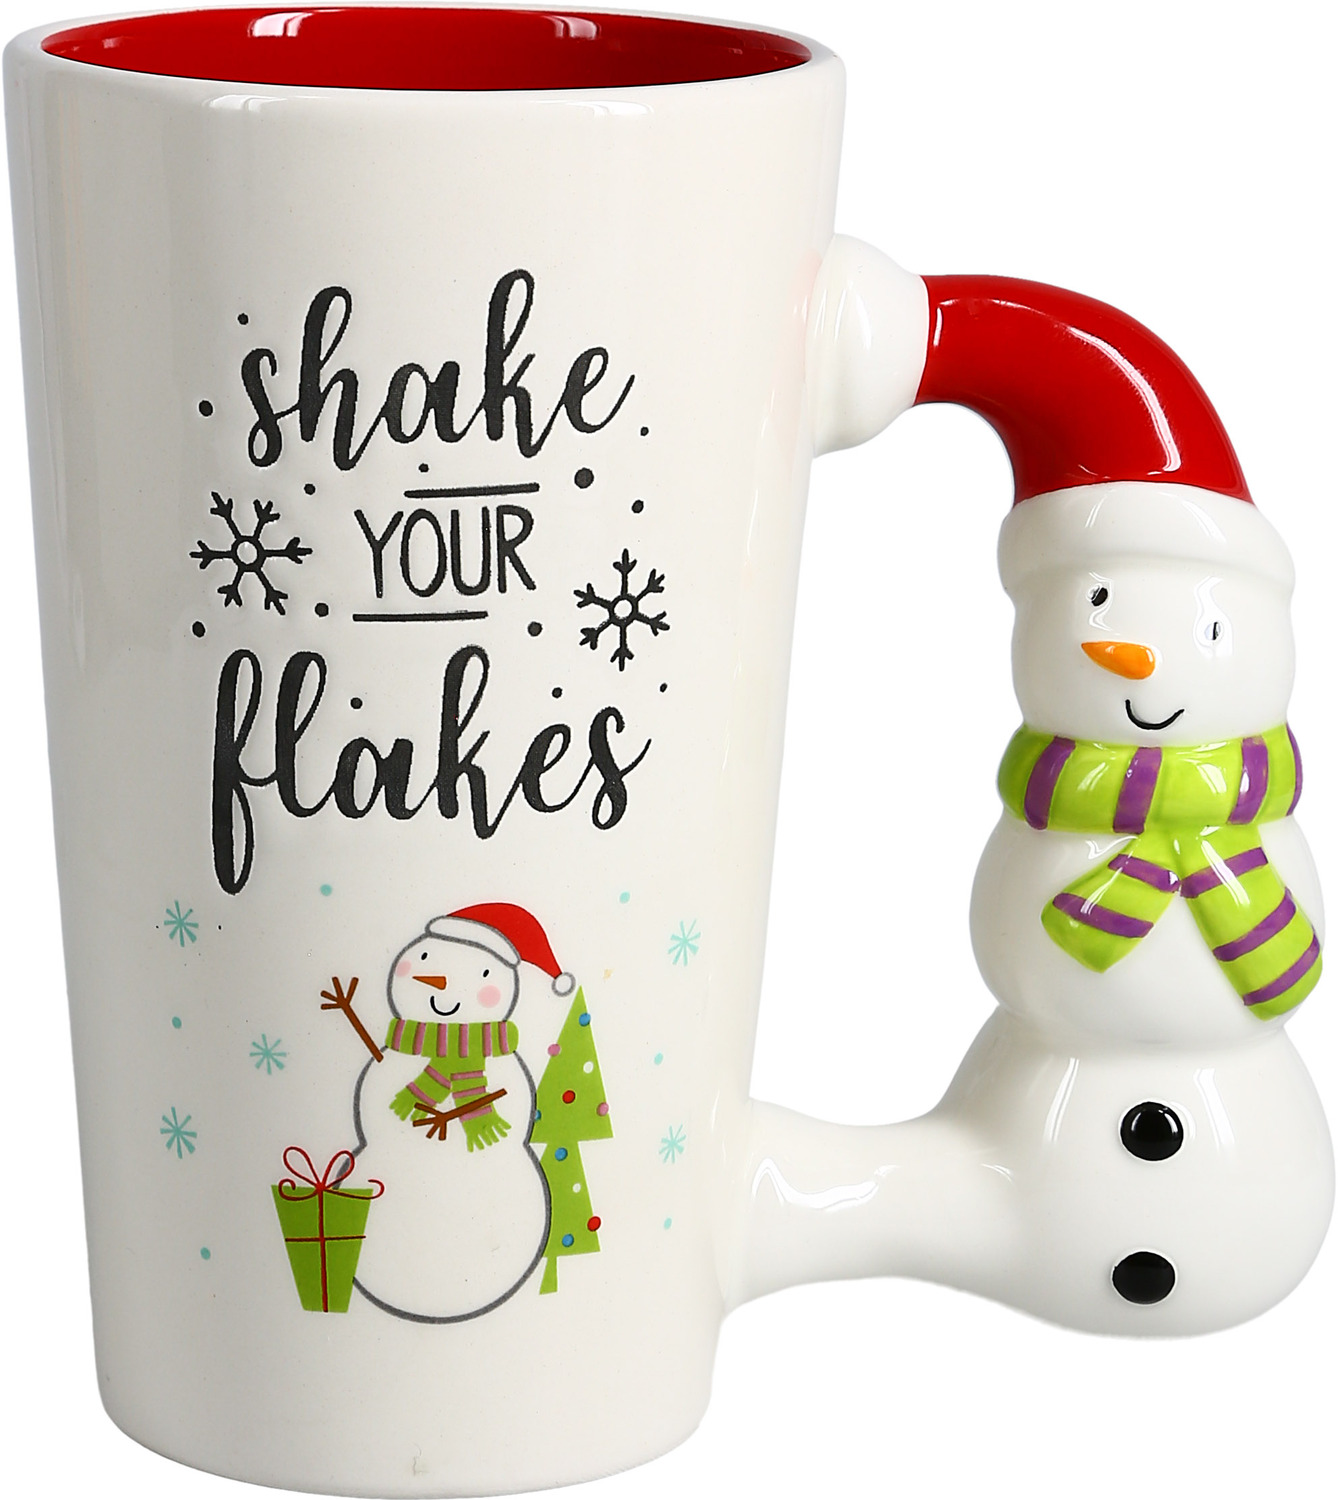 Shake Your Flakes by Holiday Hoopla - Shake Your Flakes - 17.5 oz Latte Cup